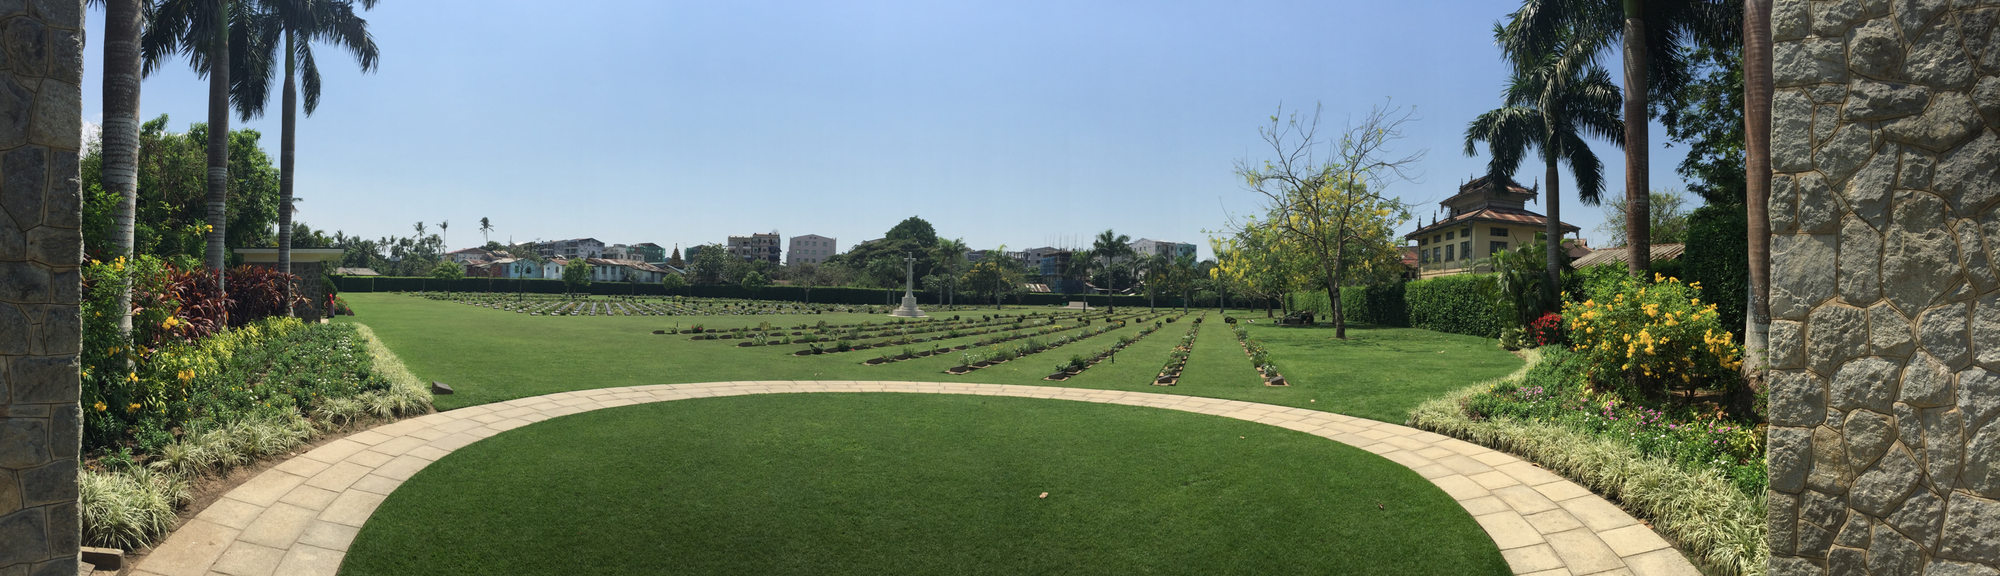 Photo by Author — panorama view of the Rangoon War Cemetery from the main gate